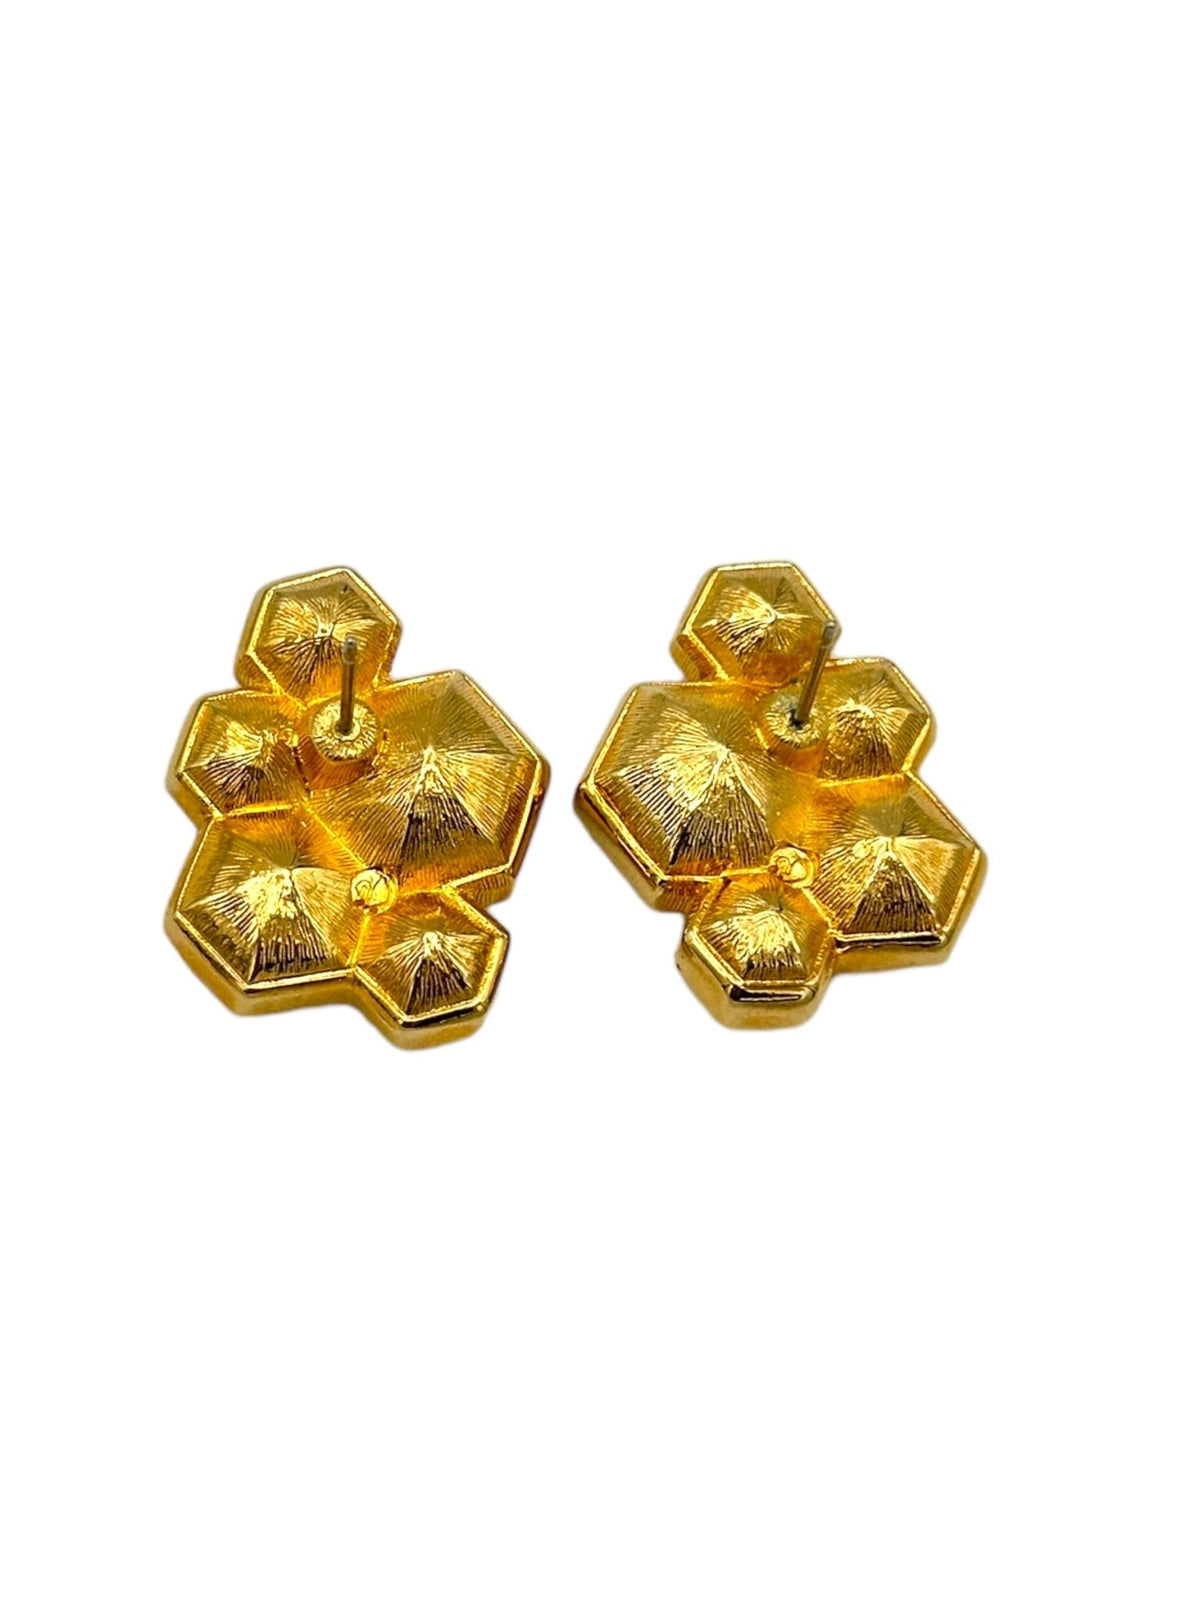 Gold Swarovski SAL Clear Crystal Classic Honeycomb Pierced Earrings - 24 Wishes Vintage Jewelry